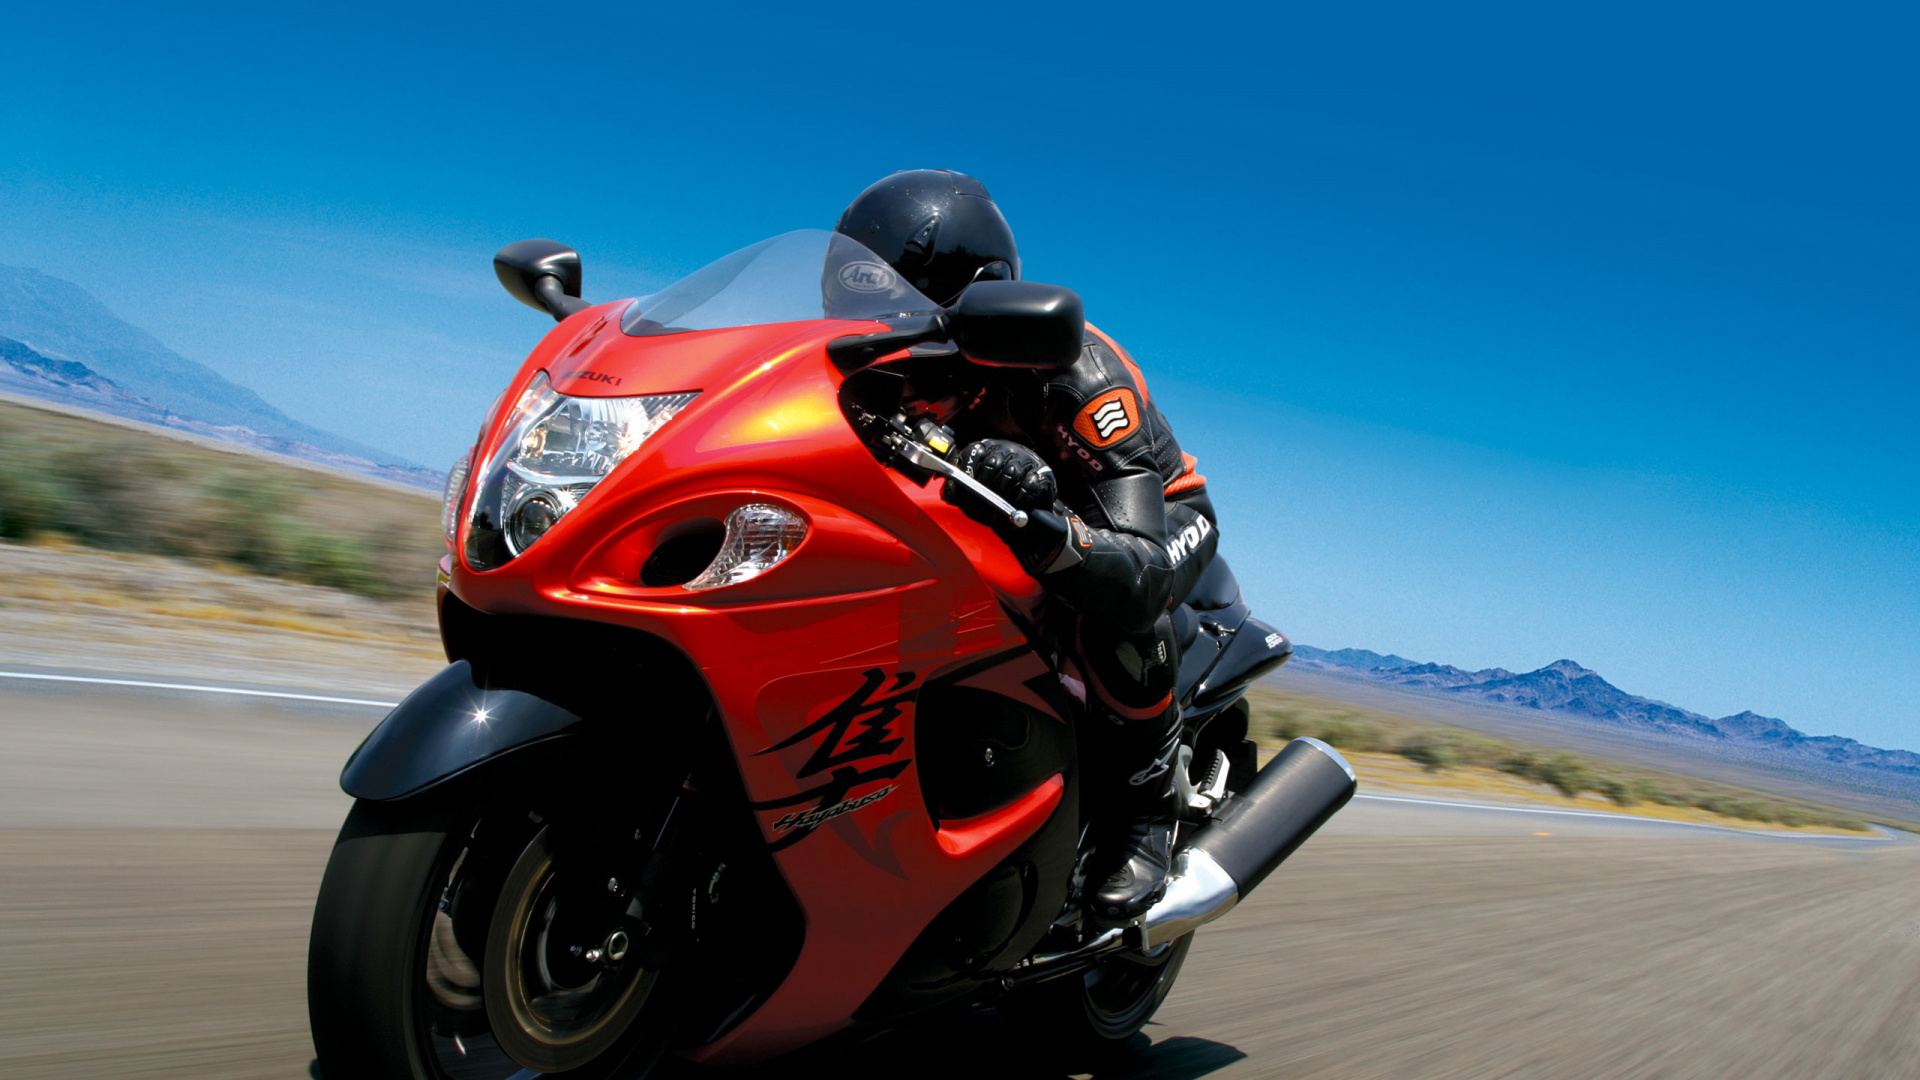 Red and Black Sports Bike on Road During Daytime. Wallpaper in 1920x1080 Resolution